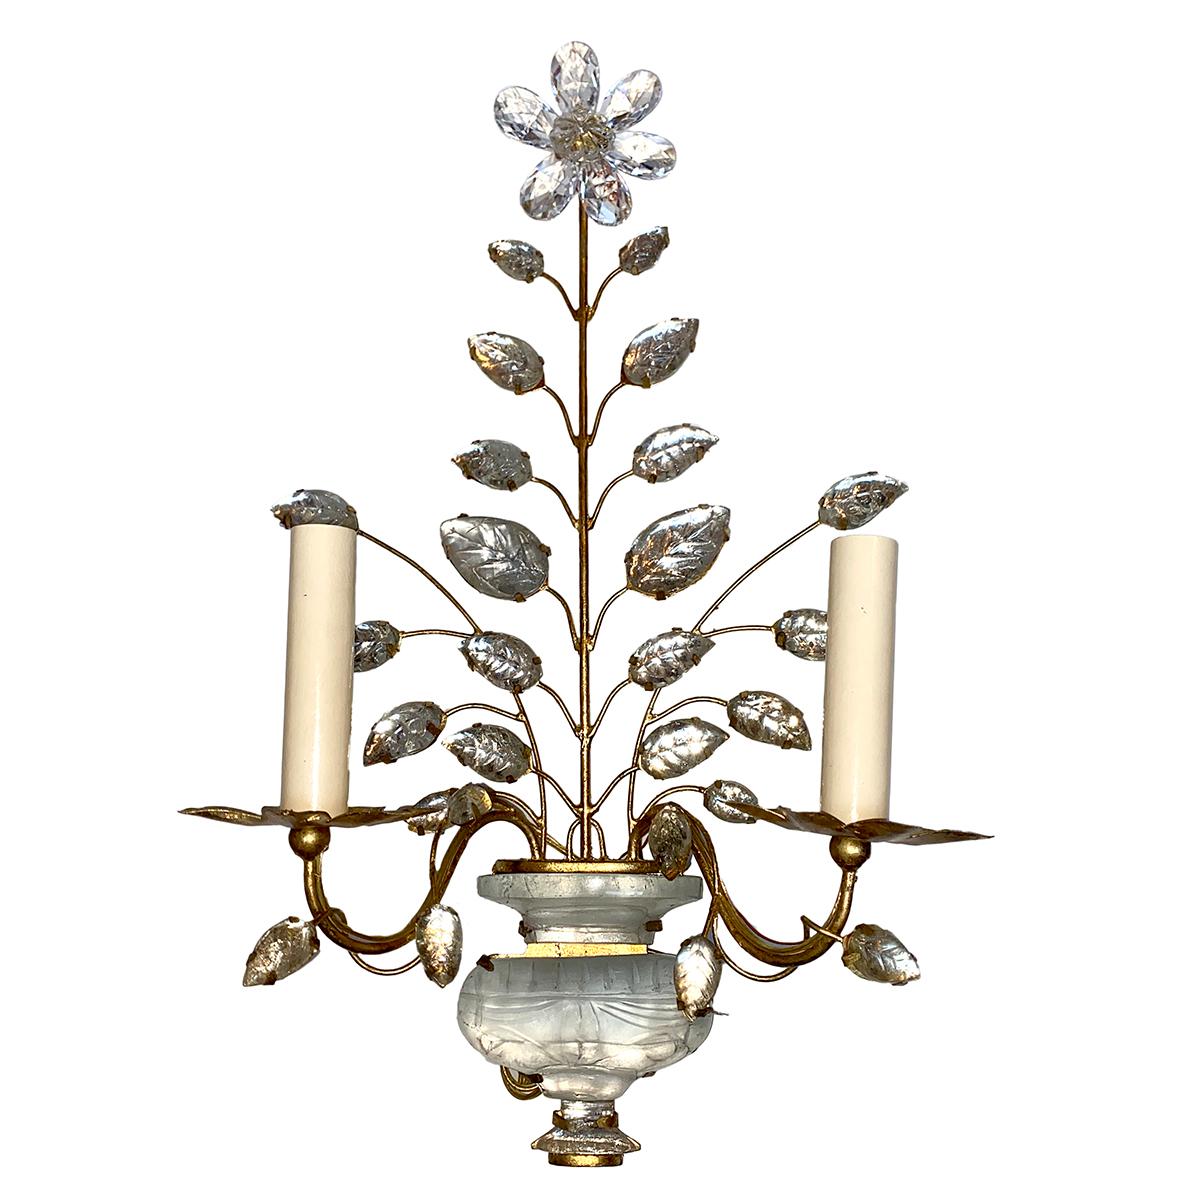 Pair of circa 1940’s French gilt metal sconces with crystal body, flowers and leaves.

Measurements:
Height: 19